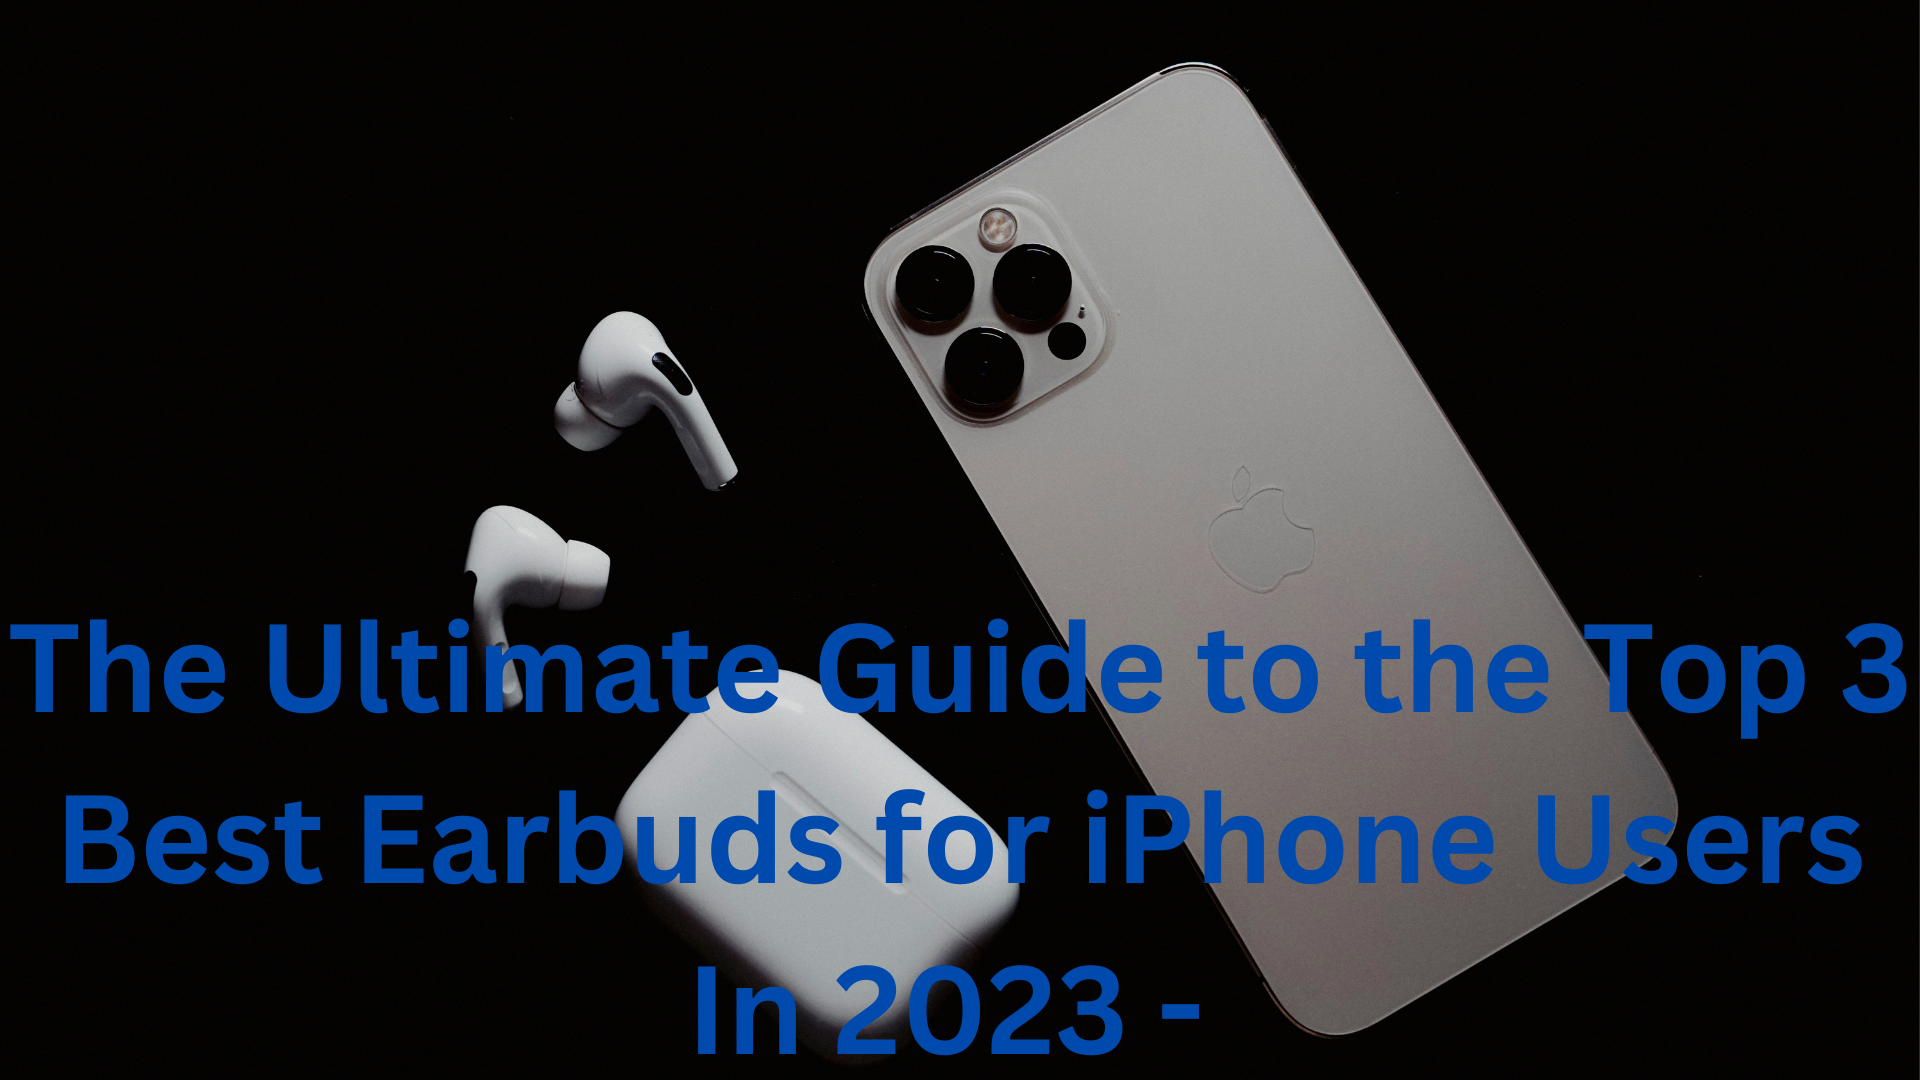 The Ultimate Guide to the Top 3 Best Earbuds for iPhone Users In 2023